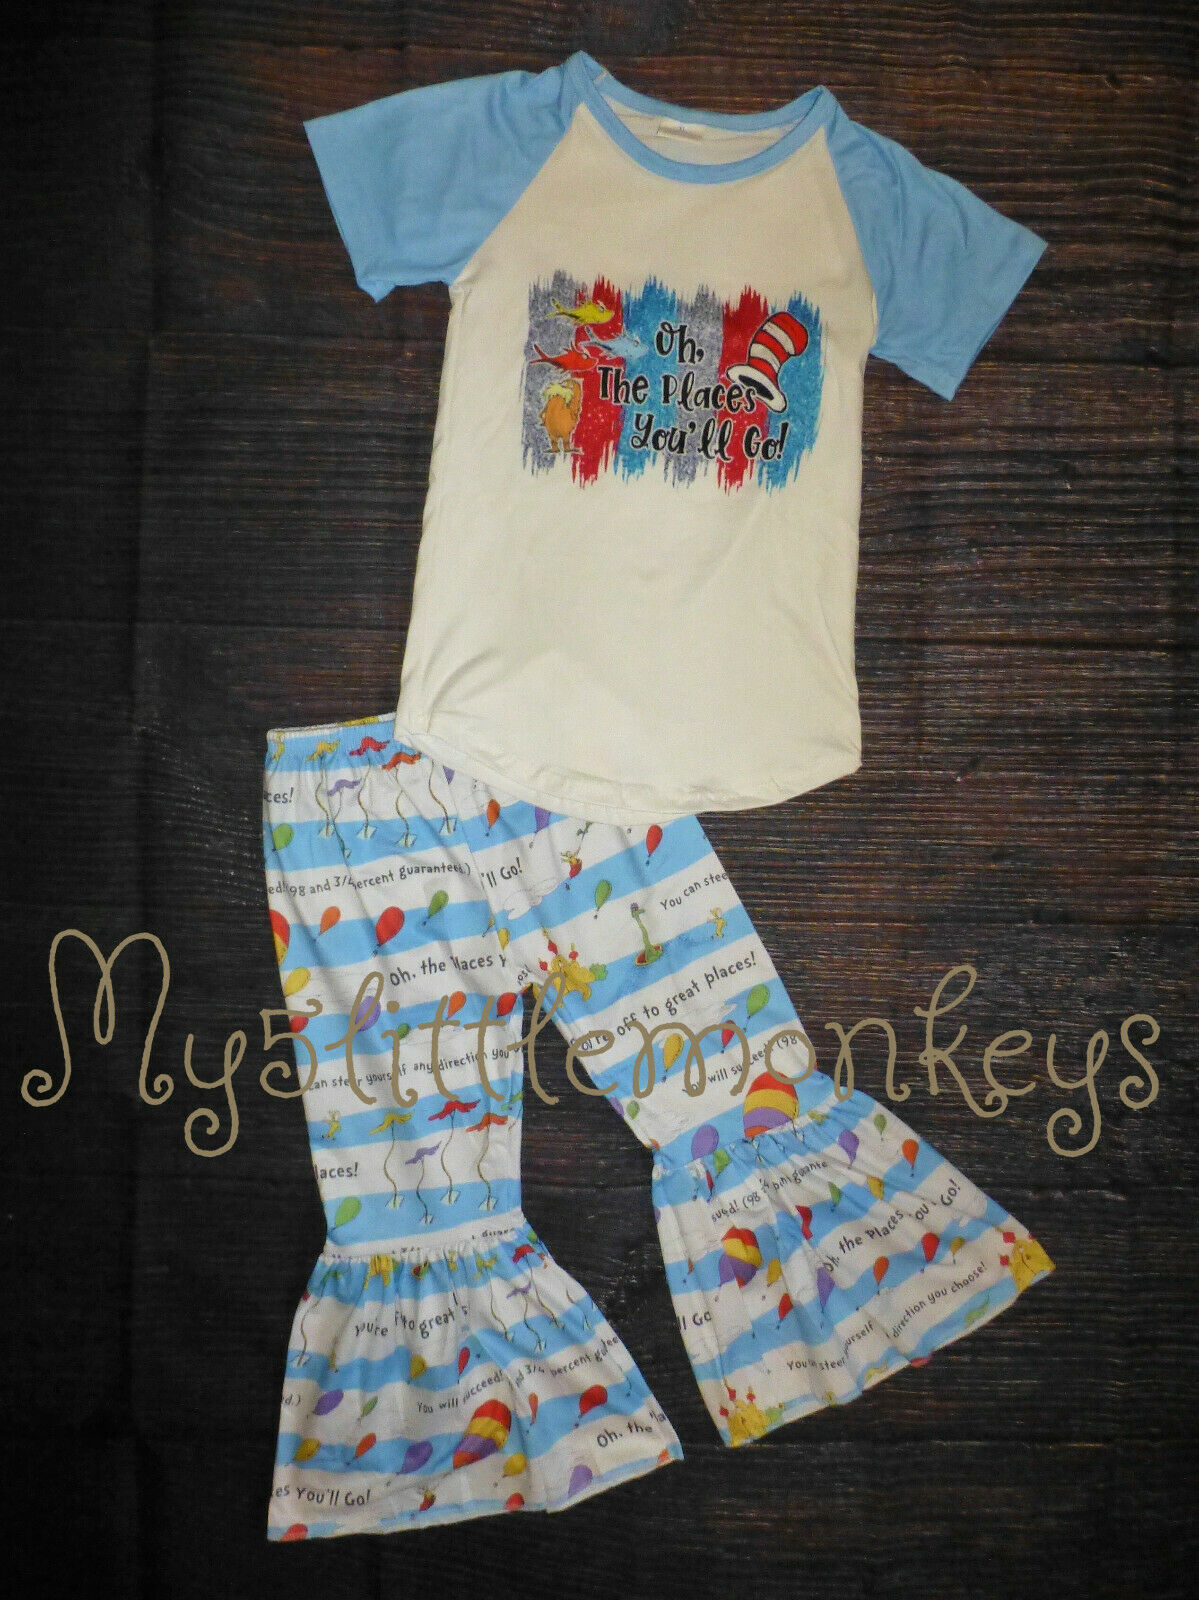 NEW Dr Seuss Oh the Places You'll Go' Bell Bottoms Girls Boutique School Outfit - $5.99 - $19.99